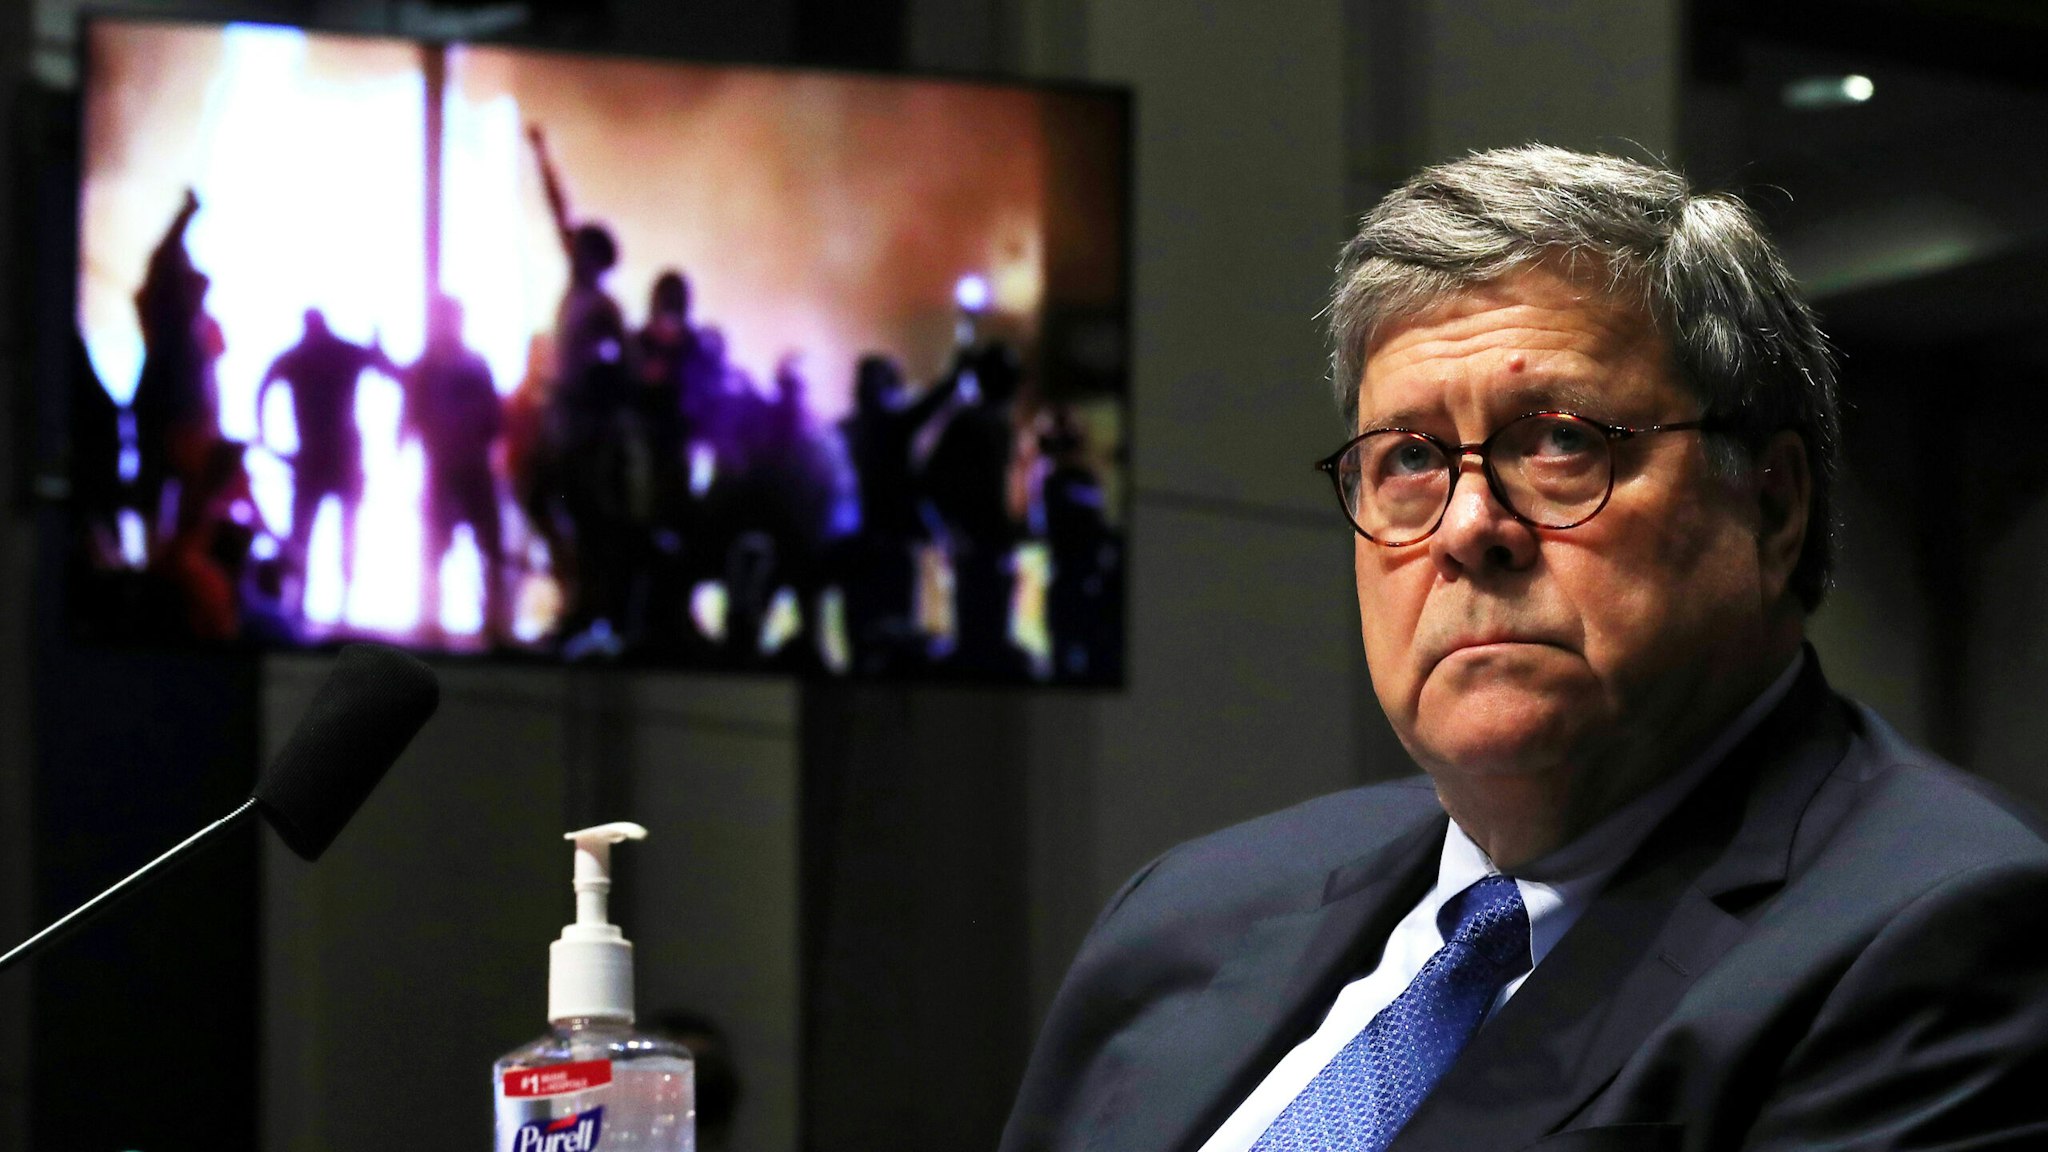 Attorney General William Barr watches a Republican Exhibit video of people rioting, during the House Judiciary Committee hearing in the Congressional Auditorium at the US Capitol Visitors Center July 28, 2020 in Washington, DC. - In his first congressional testimony in more than a year, Barr is expected to face questions from the committee about his deployment of federal law enforcement agents to Portland, Oregon, and other cities in response to Black Lives Matter protests; his role in using federal agents to violently clear protesters from Lafayette Square near the White House last month before a photo opportunity for President Donald Trump in front of a church; his intervention in court cases involving Trump's allies Roger Stone and Michael Flynn; and other issues.